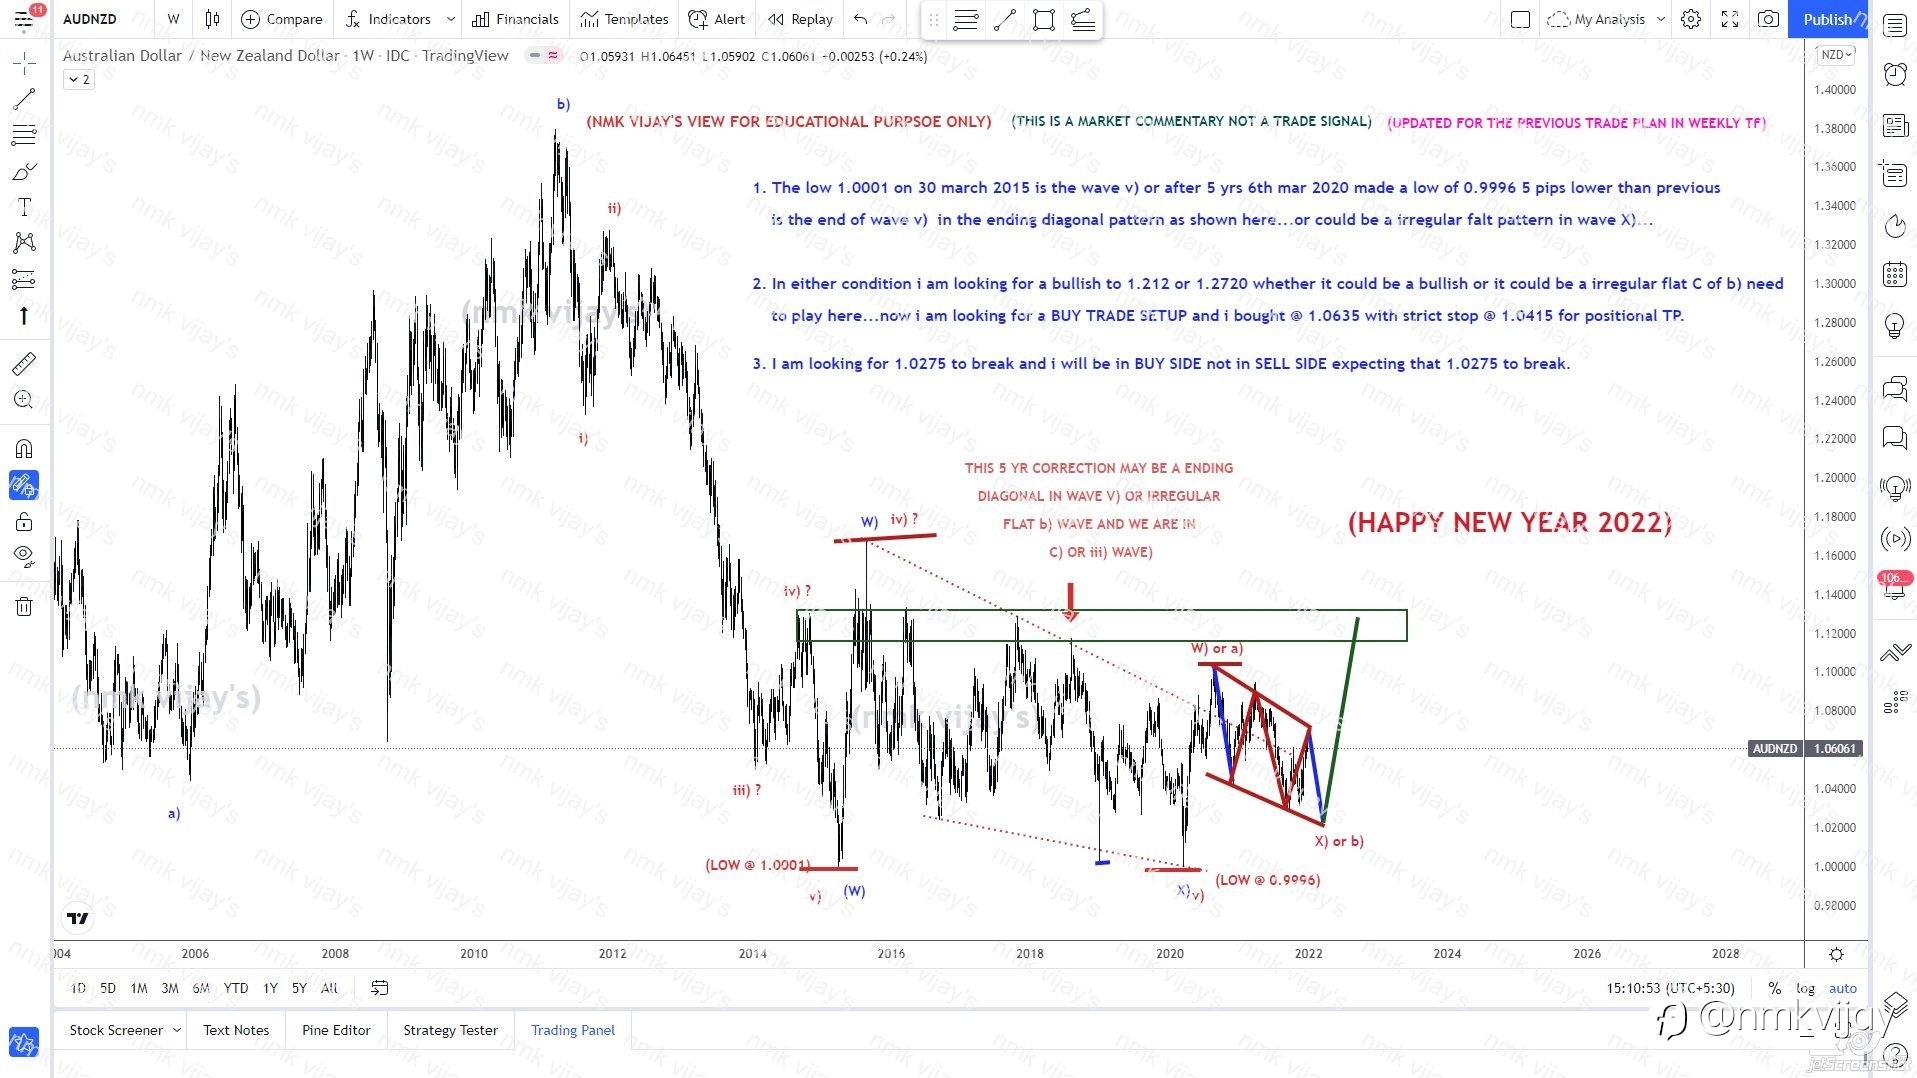 AUDNZD-Stick to my Last year trade plan waiting for BUY 1.0275